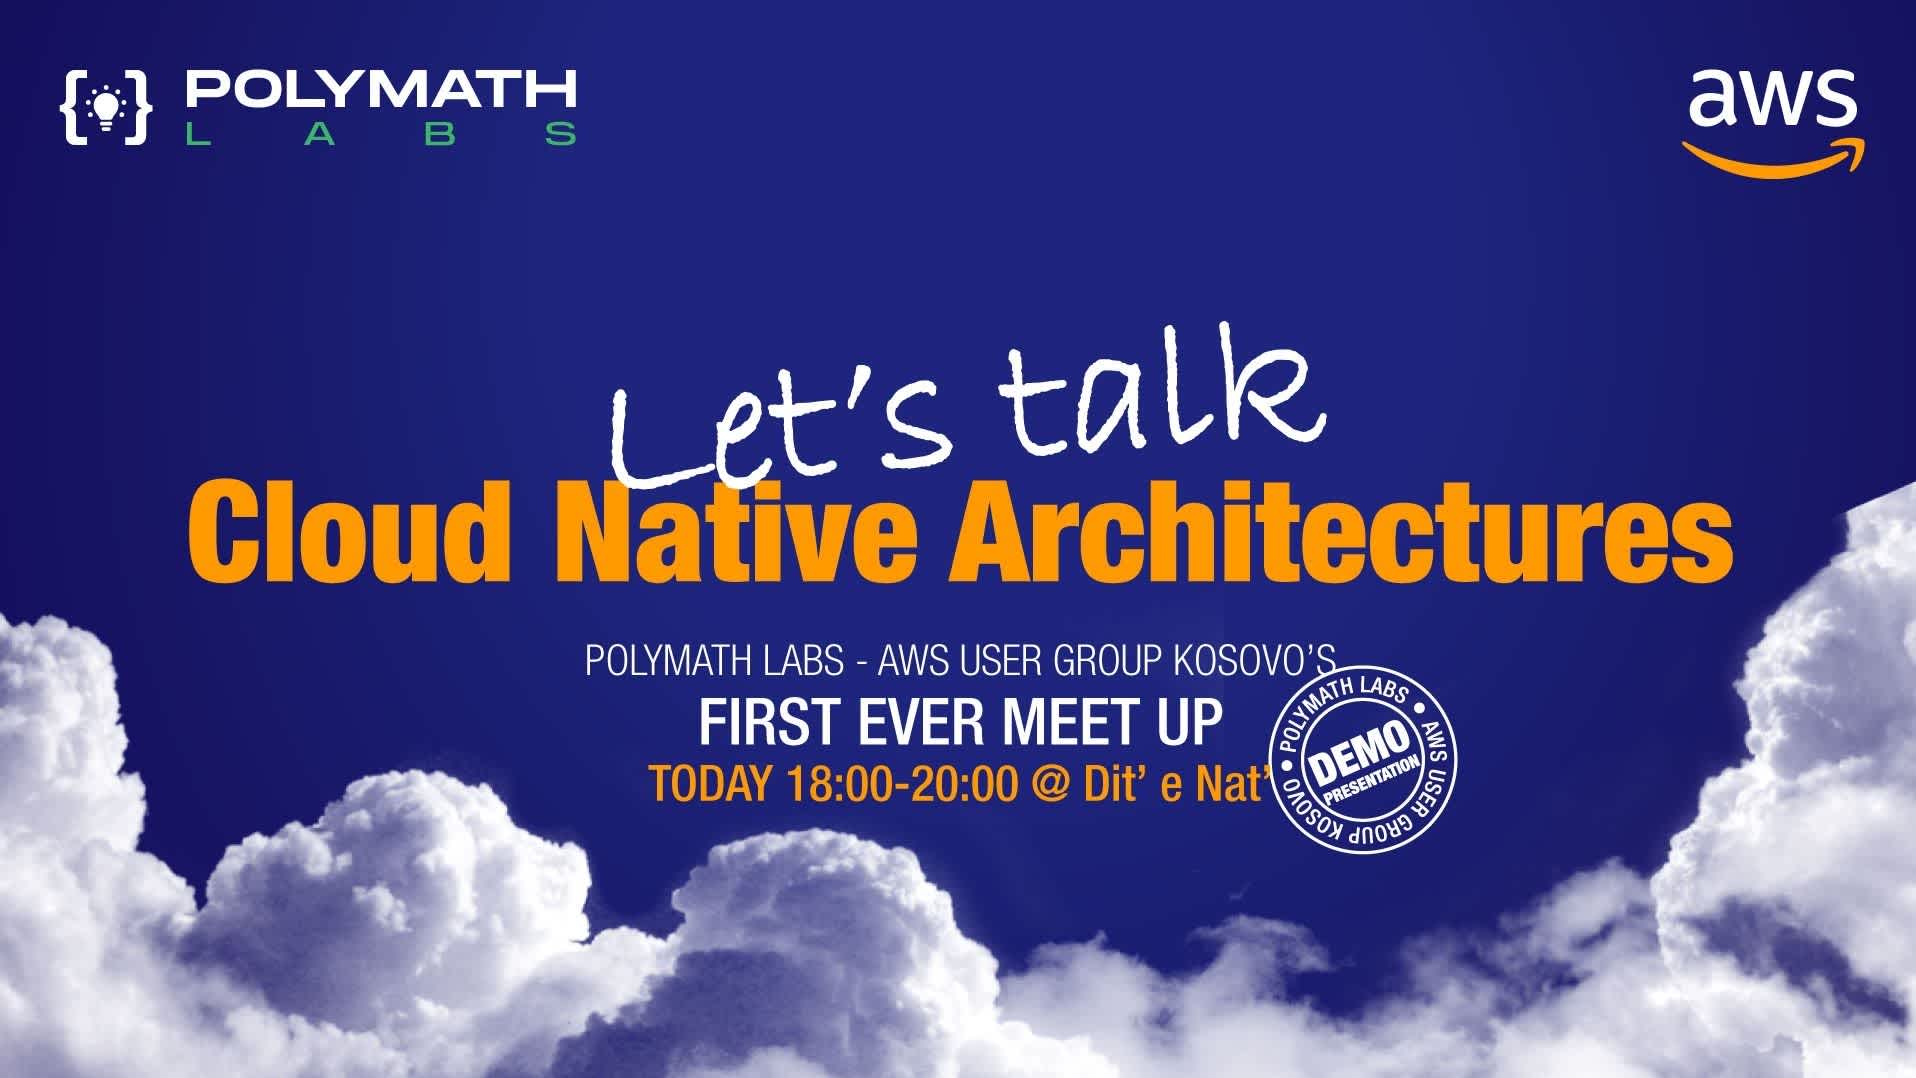 Polymath Labs Launches AWS User Group | Kosovo Meetup at Literary Watering Hole  Dit’ e Nat’